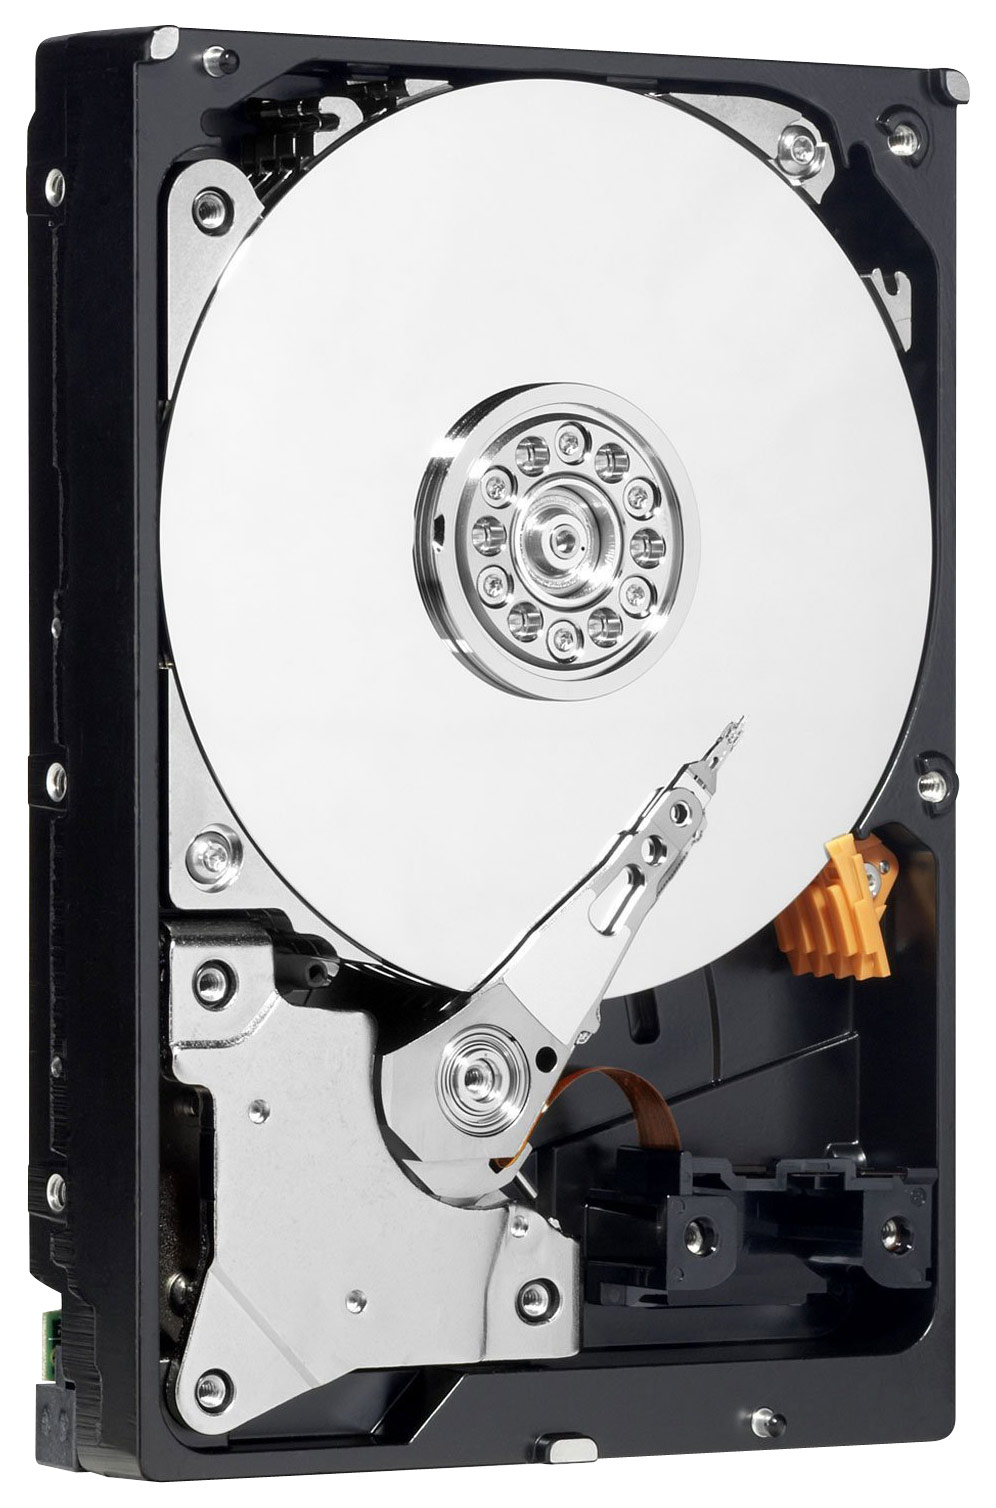 WD - Black 500GB Internal Serial ATA Hard Drive for Desktops (OEM/Bare Drive) was $79.99 now $63.99 (20.0% off)